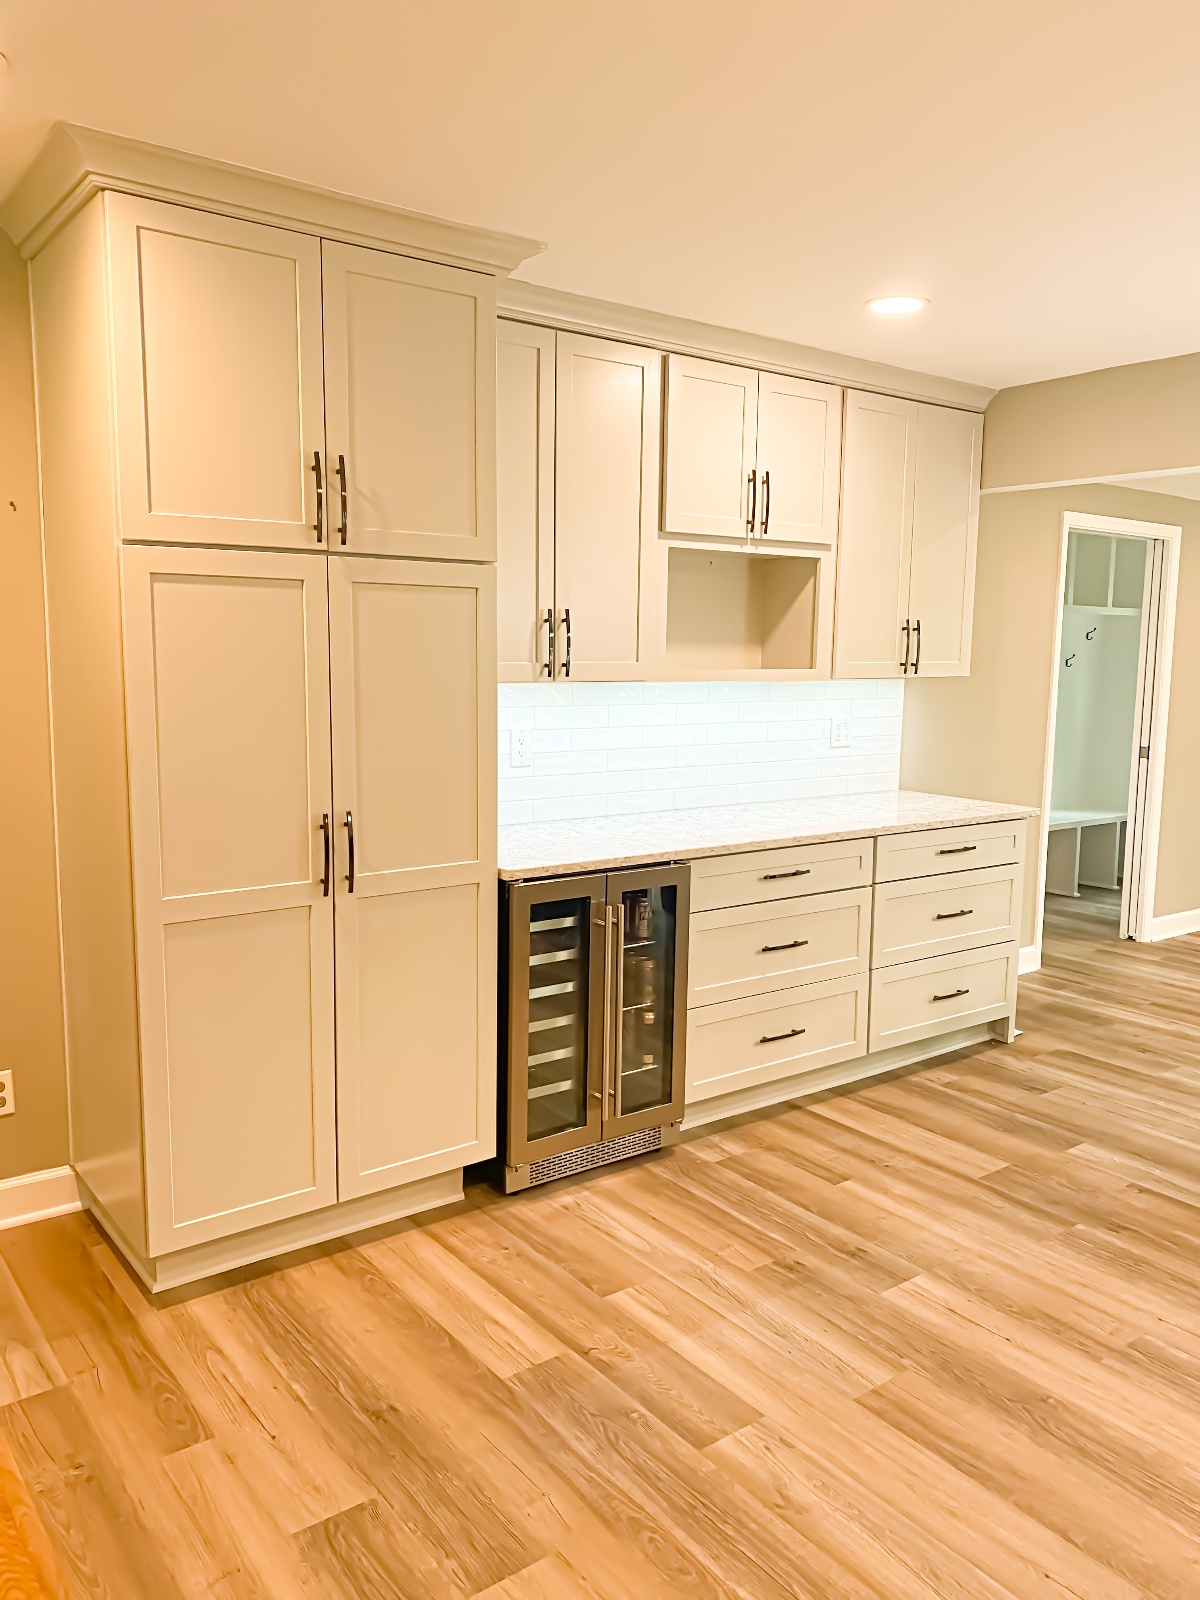 White kitchen cabinets with small steel refrigerator or wine chiller built in